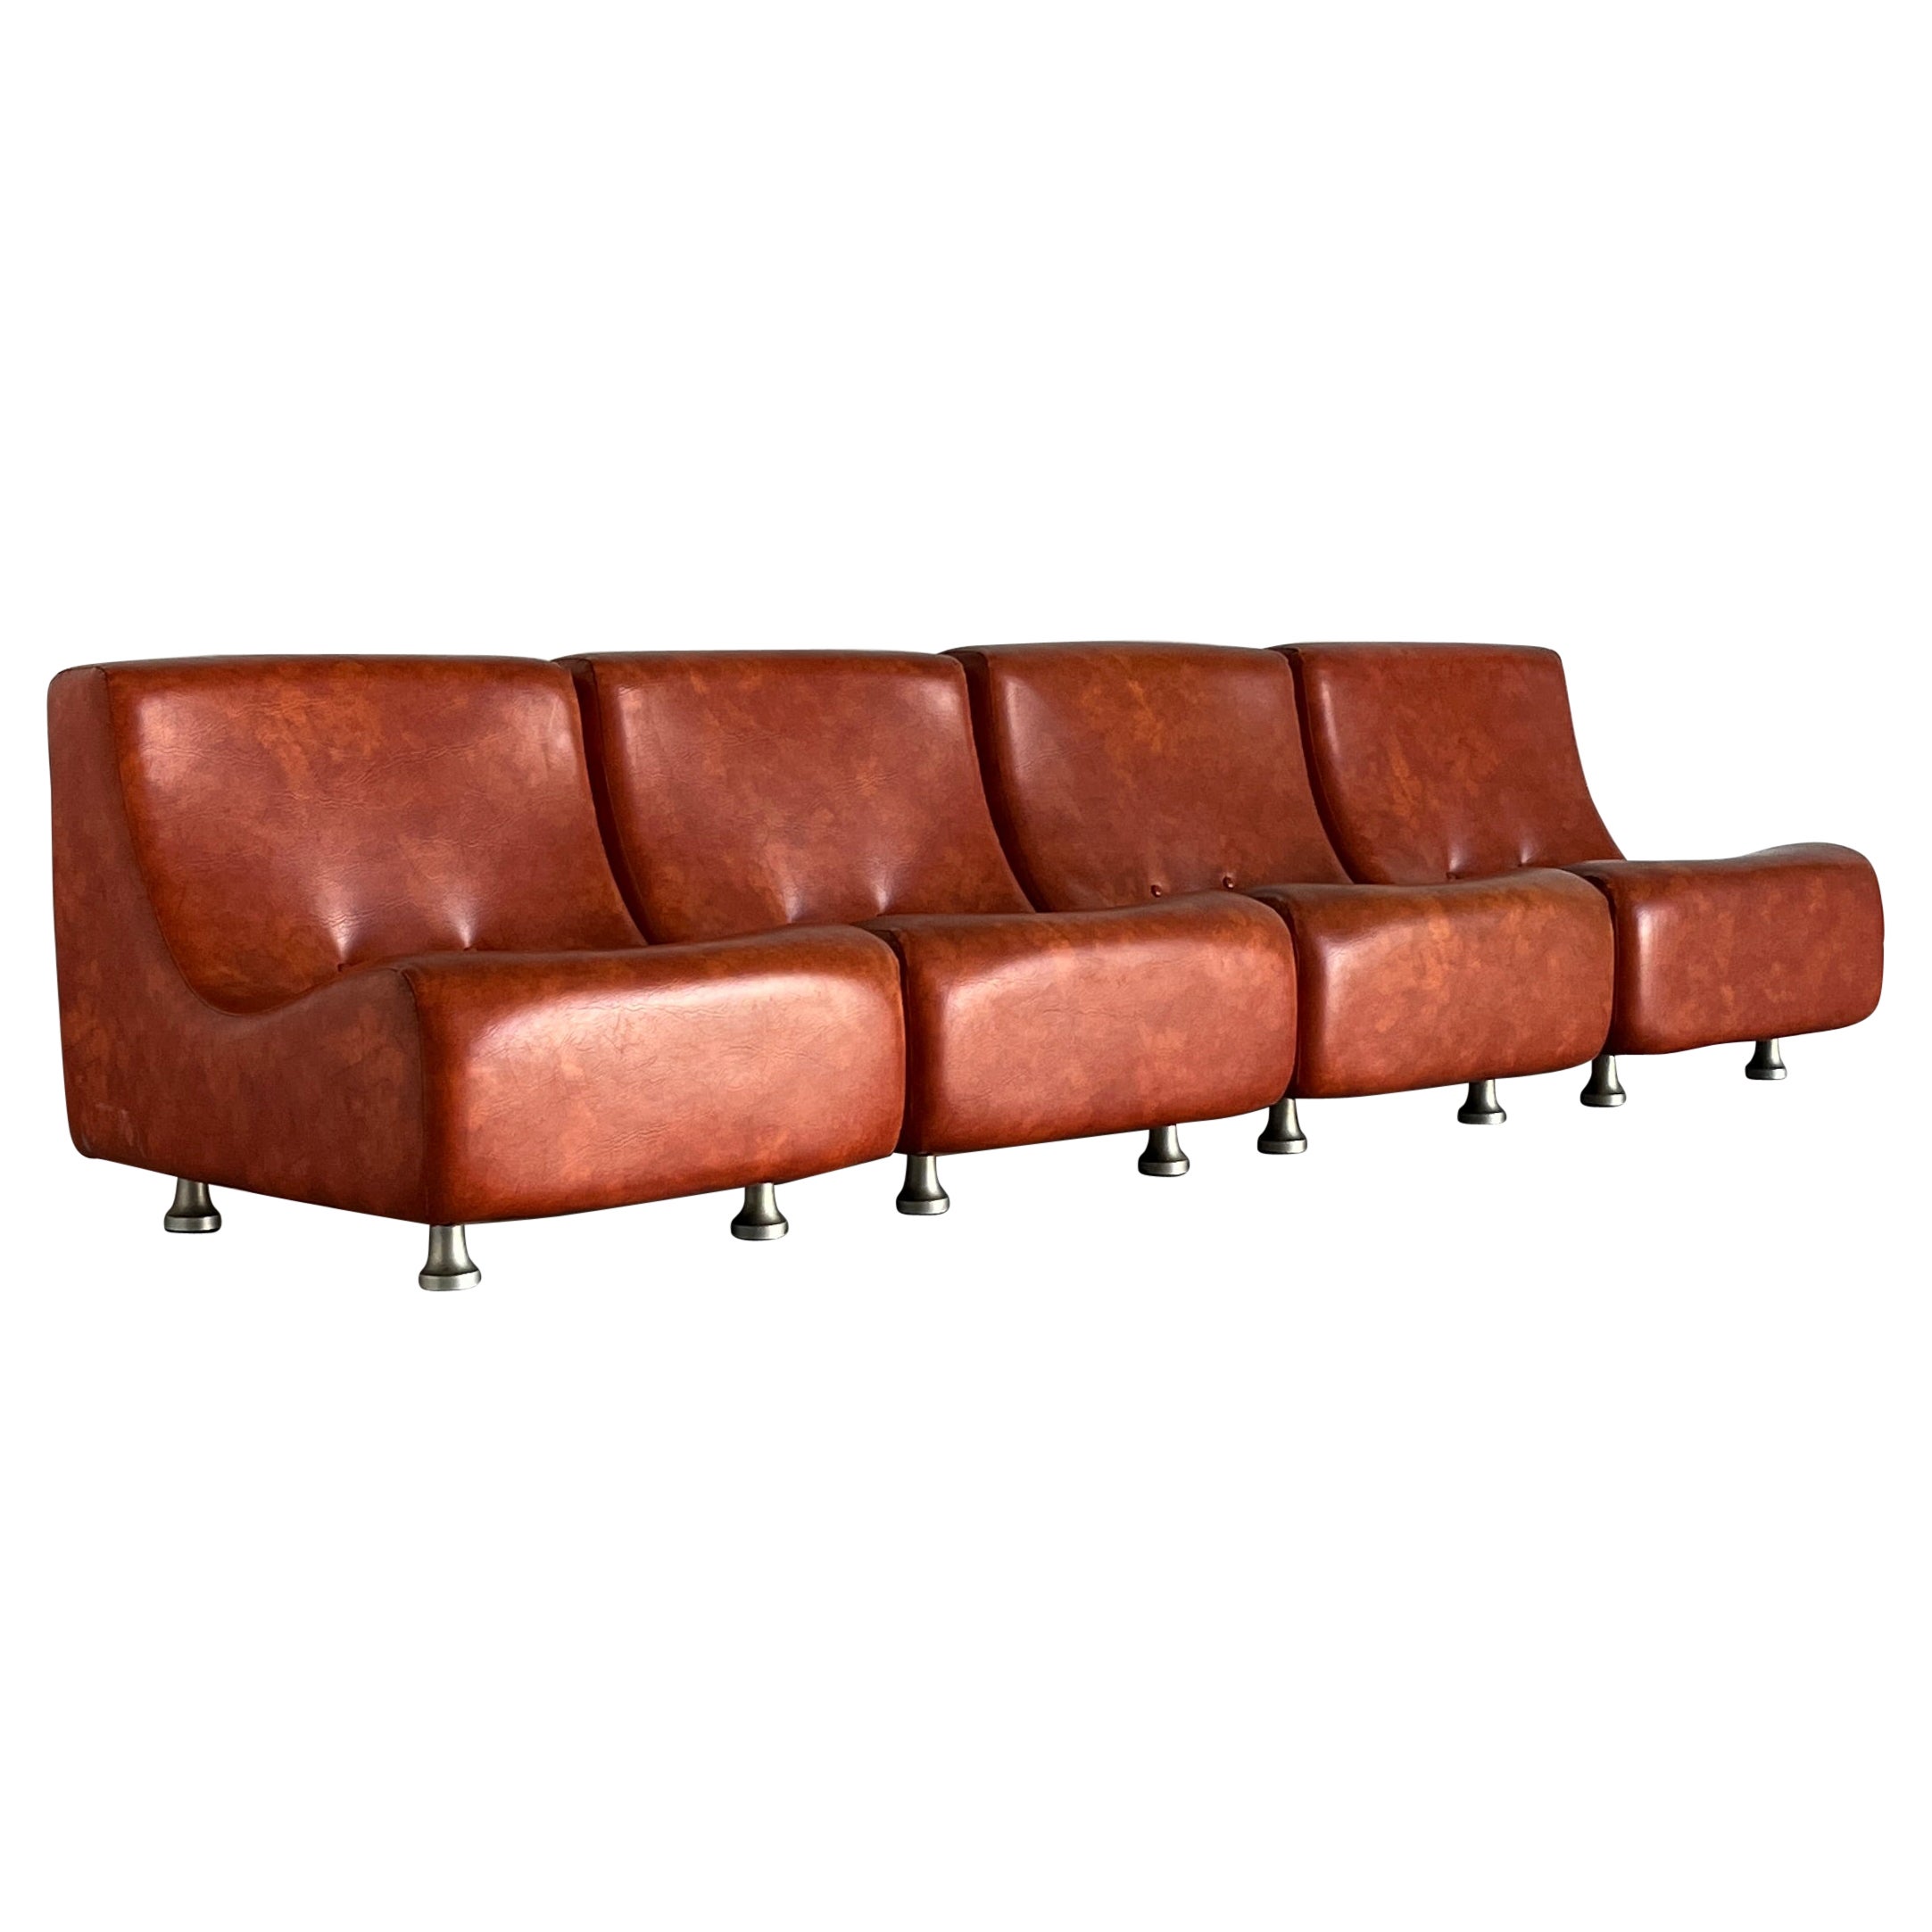 Vintage Italian Space Age Modular Sofa, Faux Leather, in Style of COR, 70s Italy